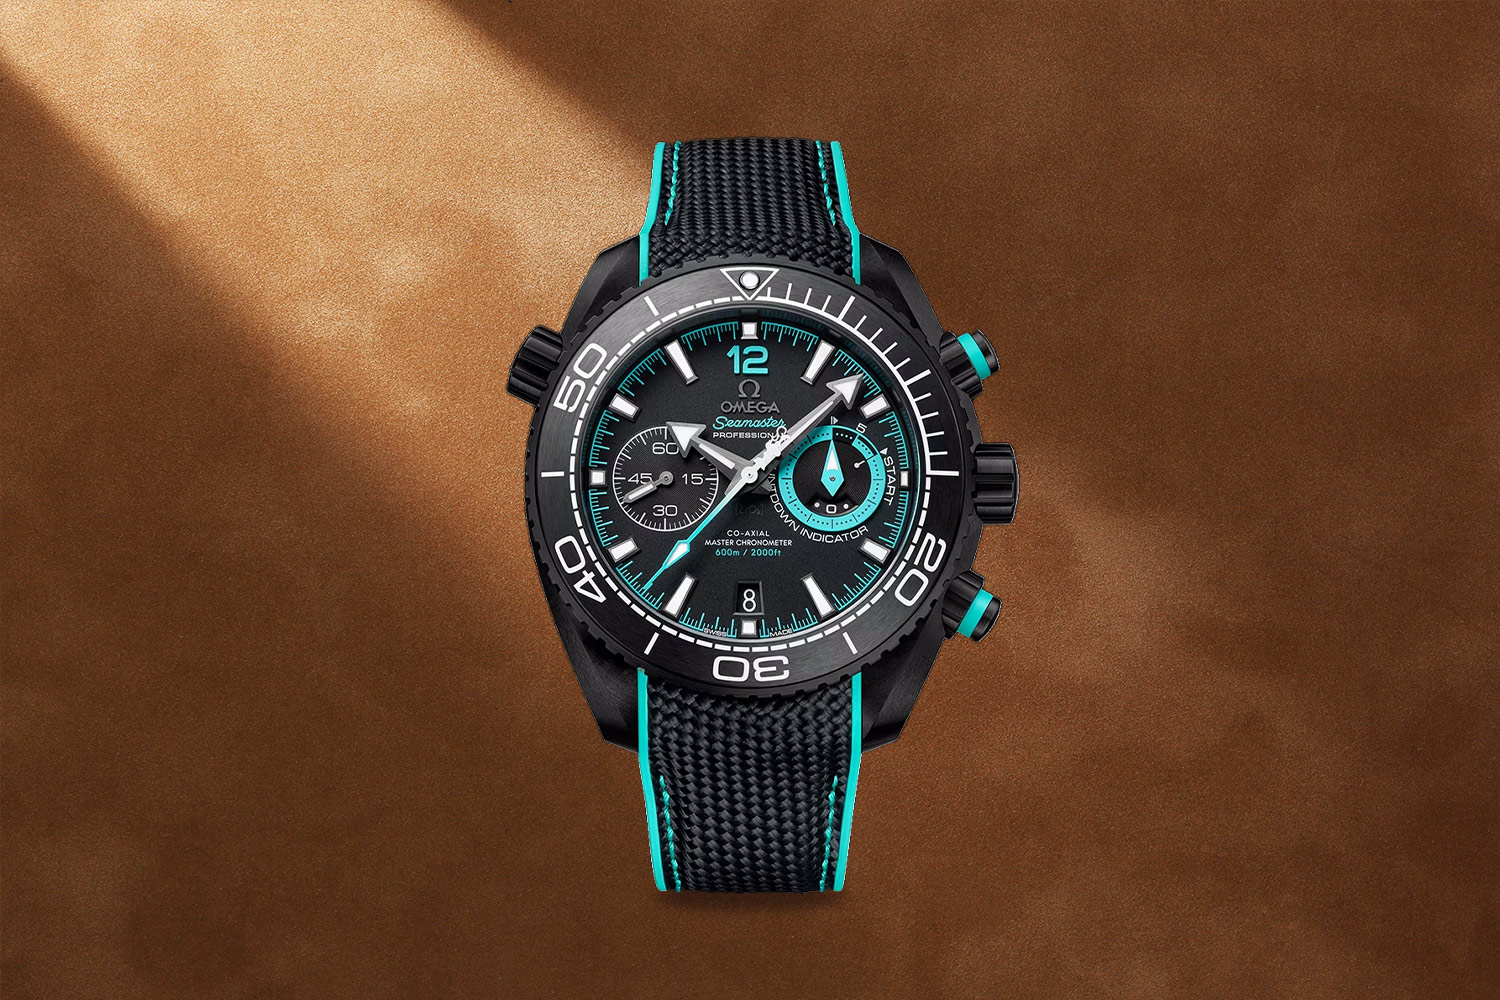 Black watch with turquoise accents